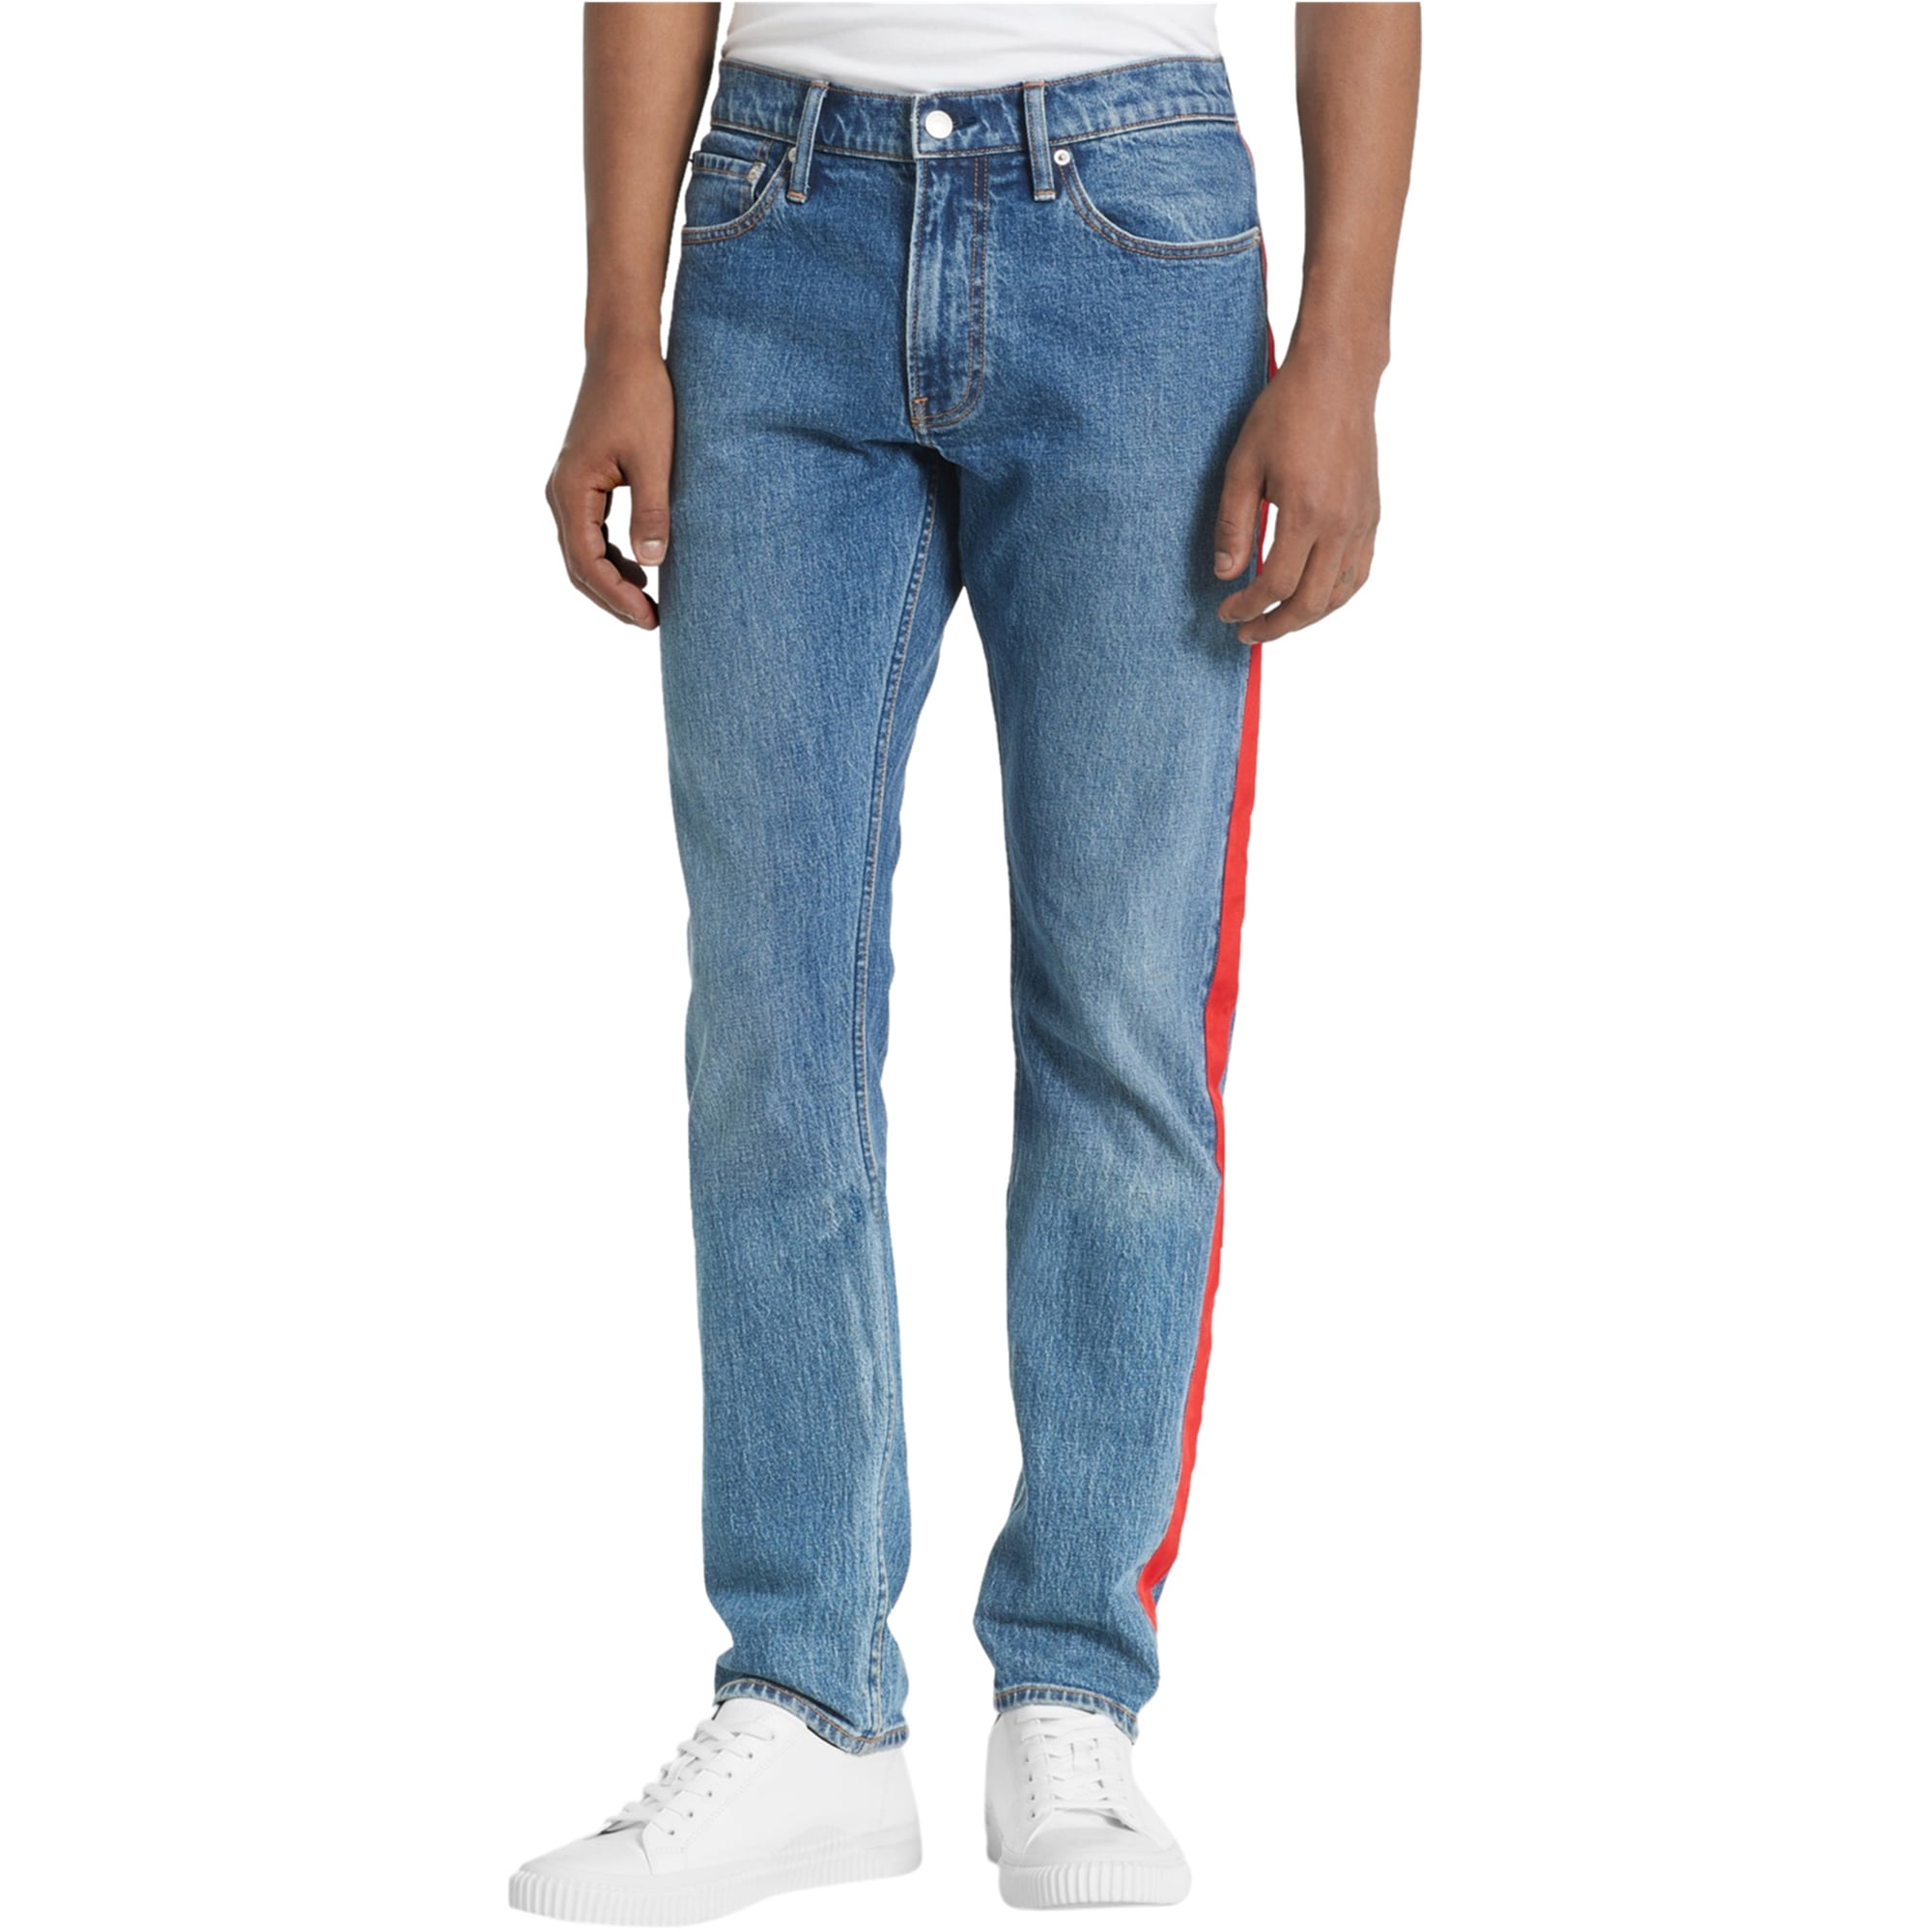 Calvin Klein Jeans BRAZILLIAN X3 Red / Black / Green - Fast delivery